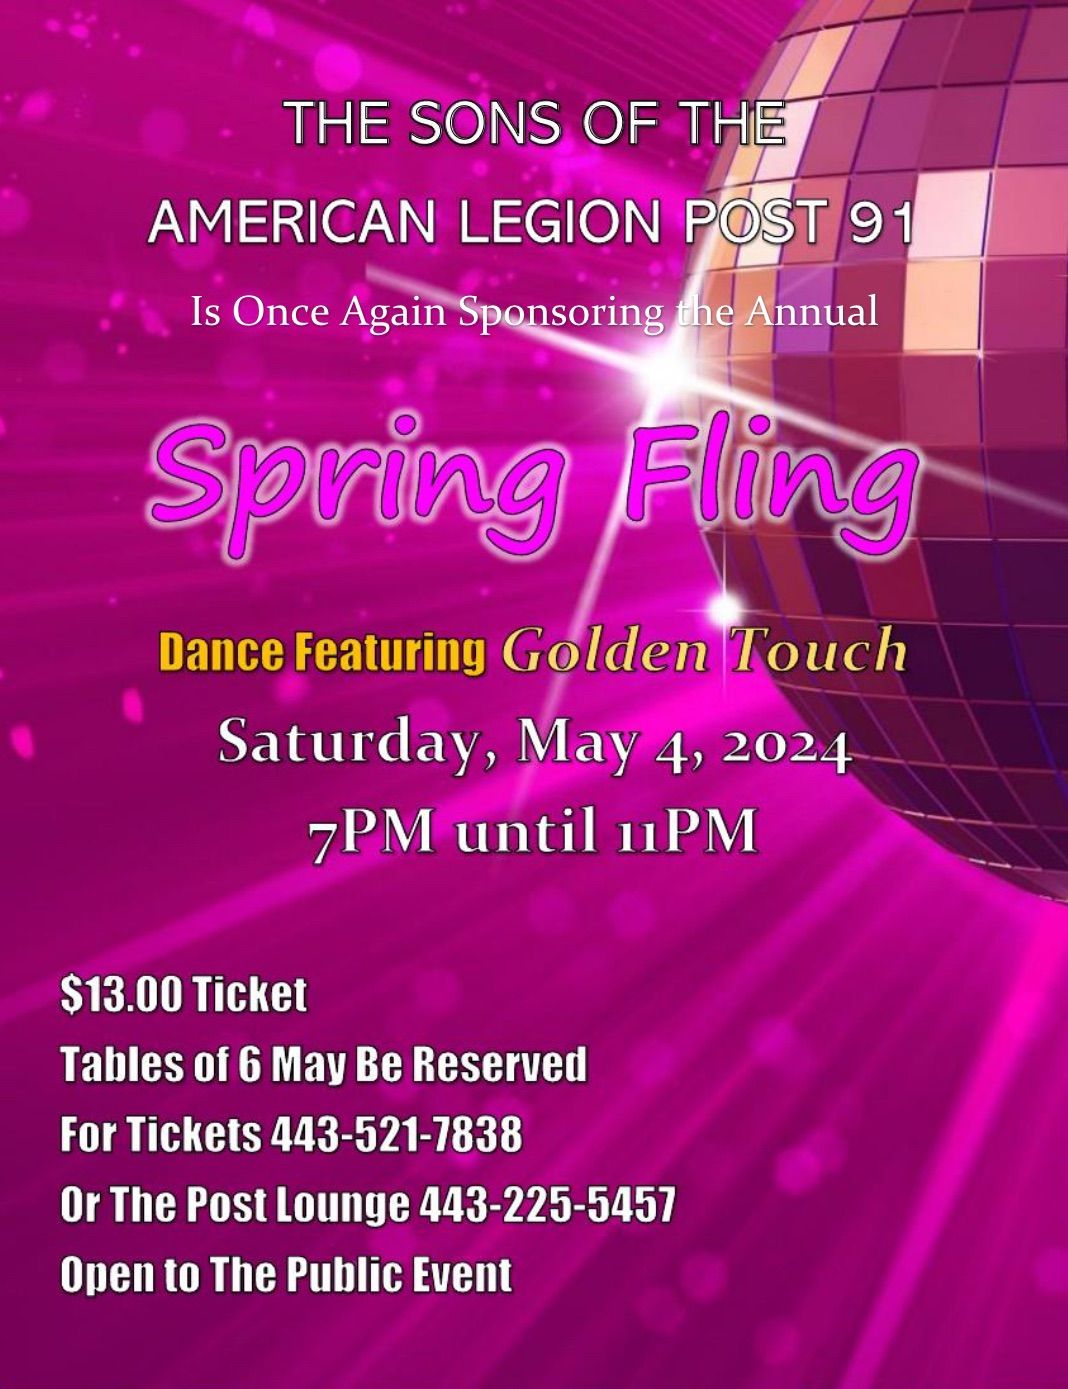 SPRING FLING DANCE Sponsored By The Sons of The American Legion Post 91